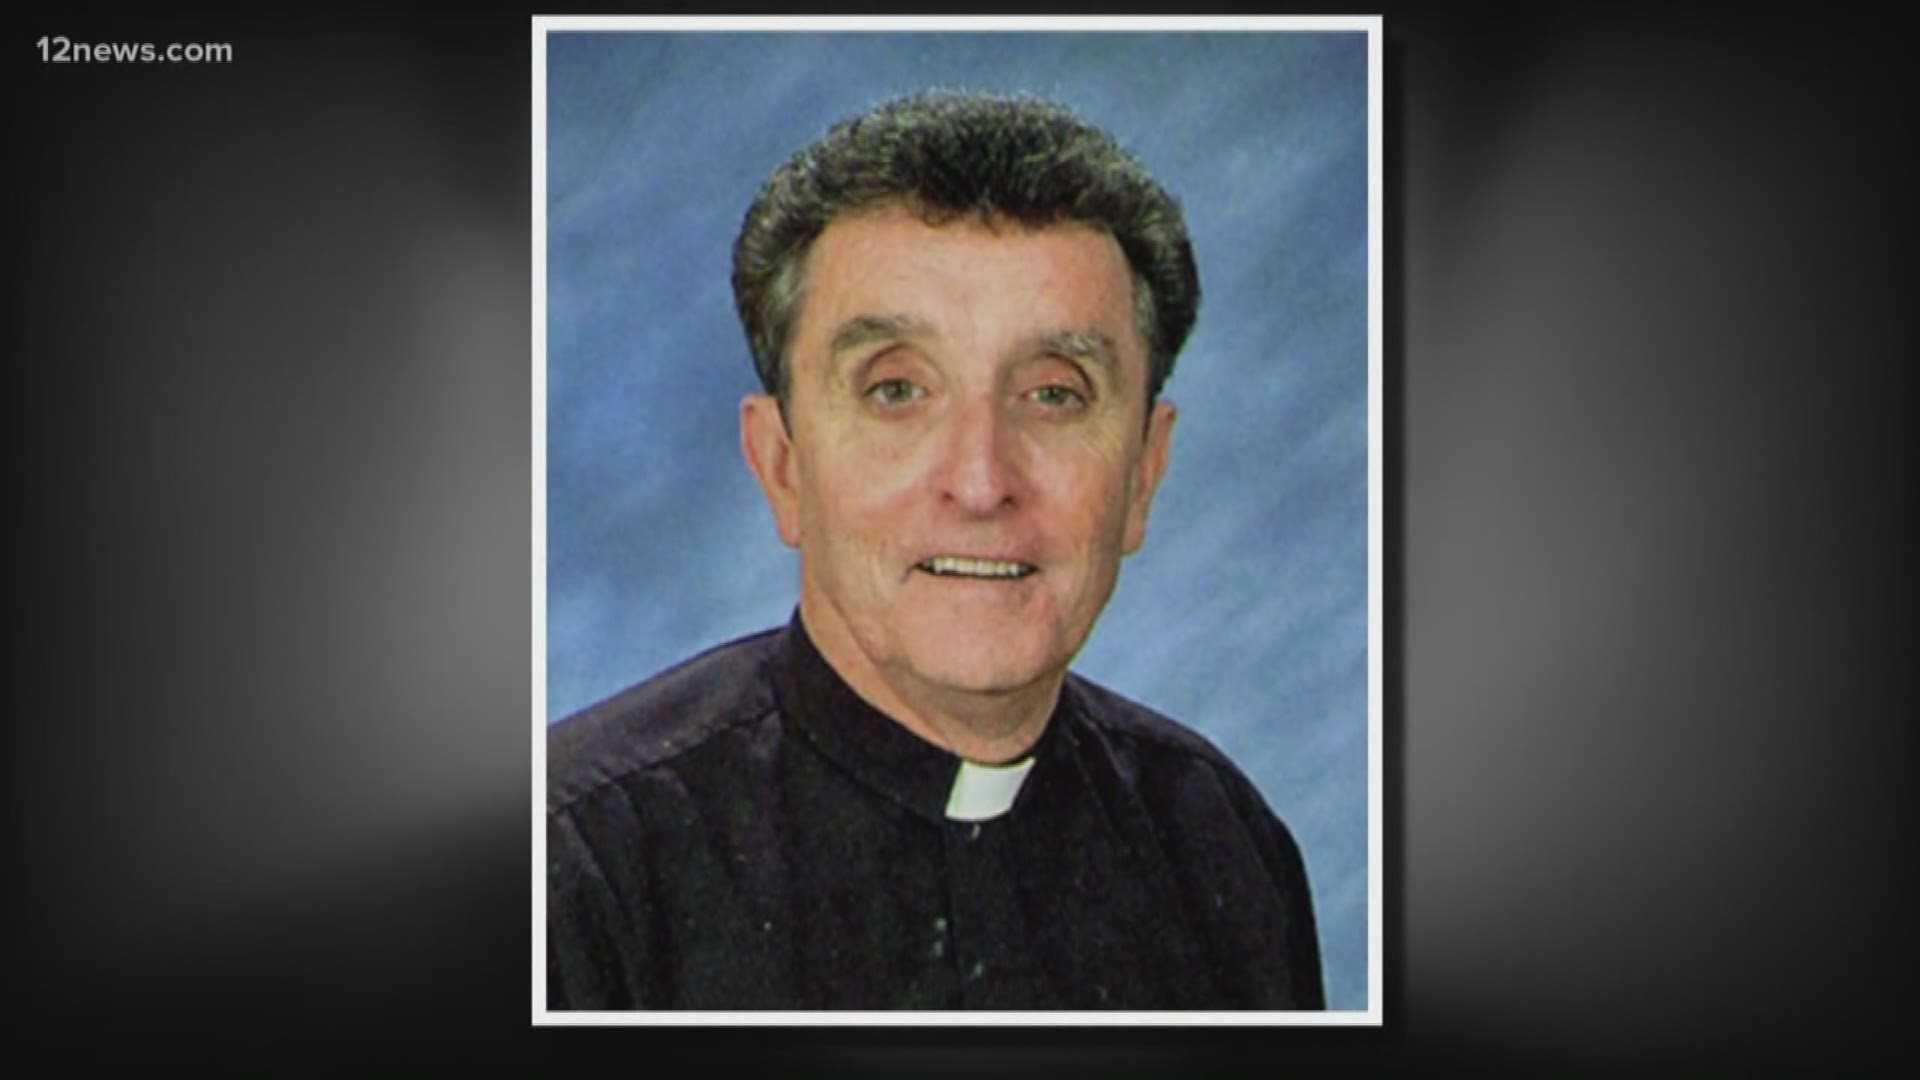 Jack Spaulding allegedly sexually abused boys at several parishes within the Phoenix Diocese over multiple decades.